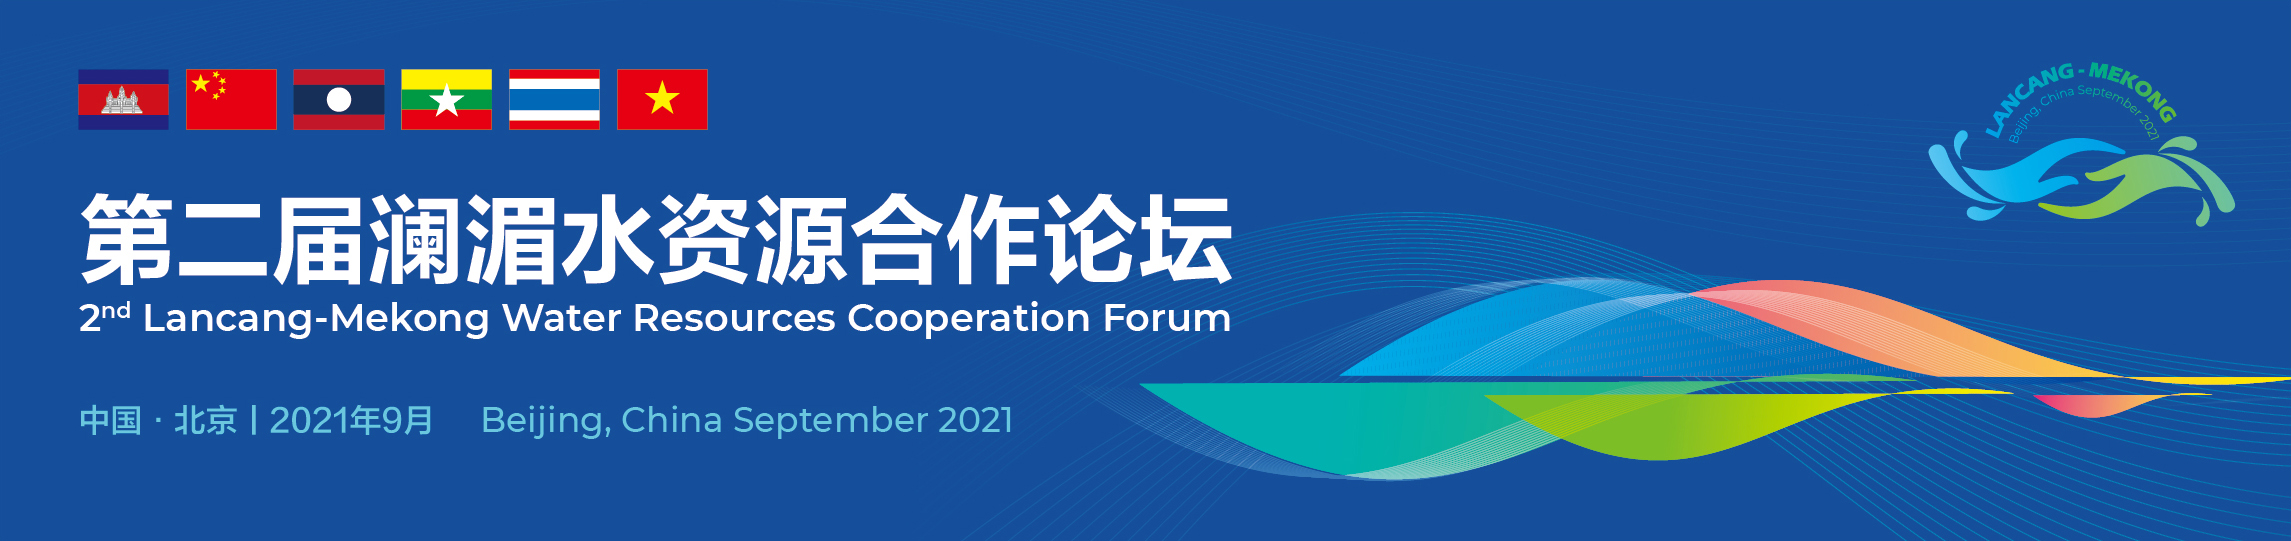 The 2nd LANCANG-MEKONG Water Resources Cooperation Forum